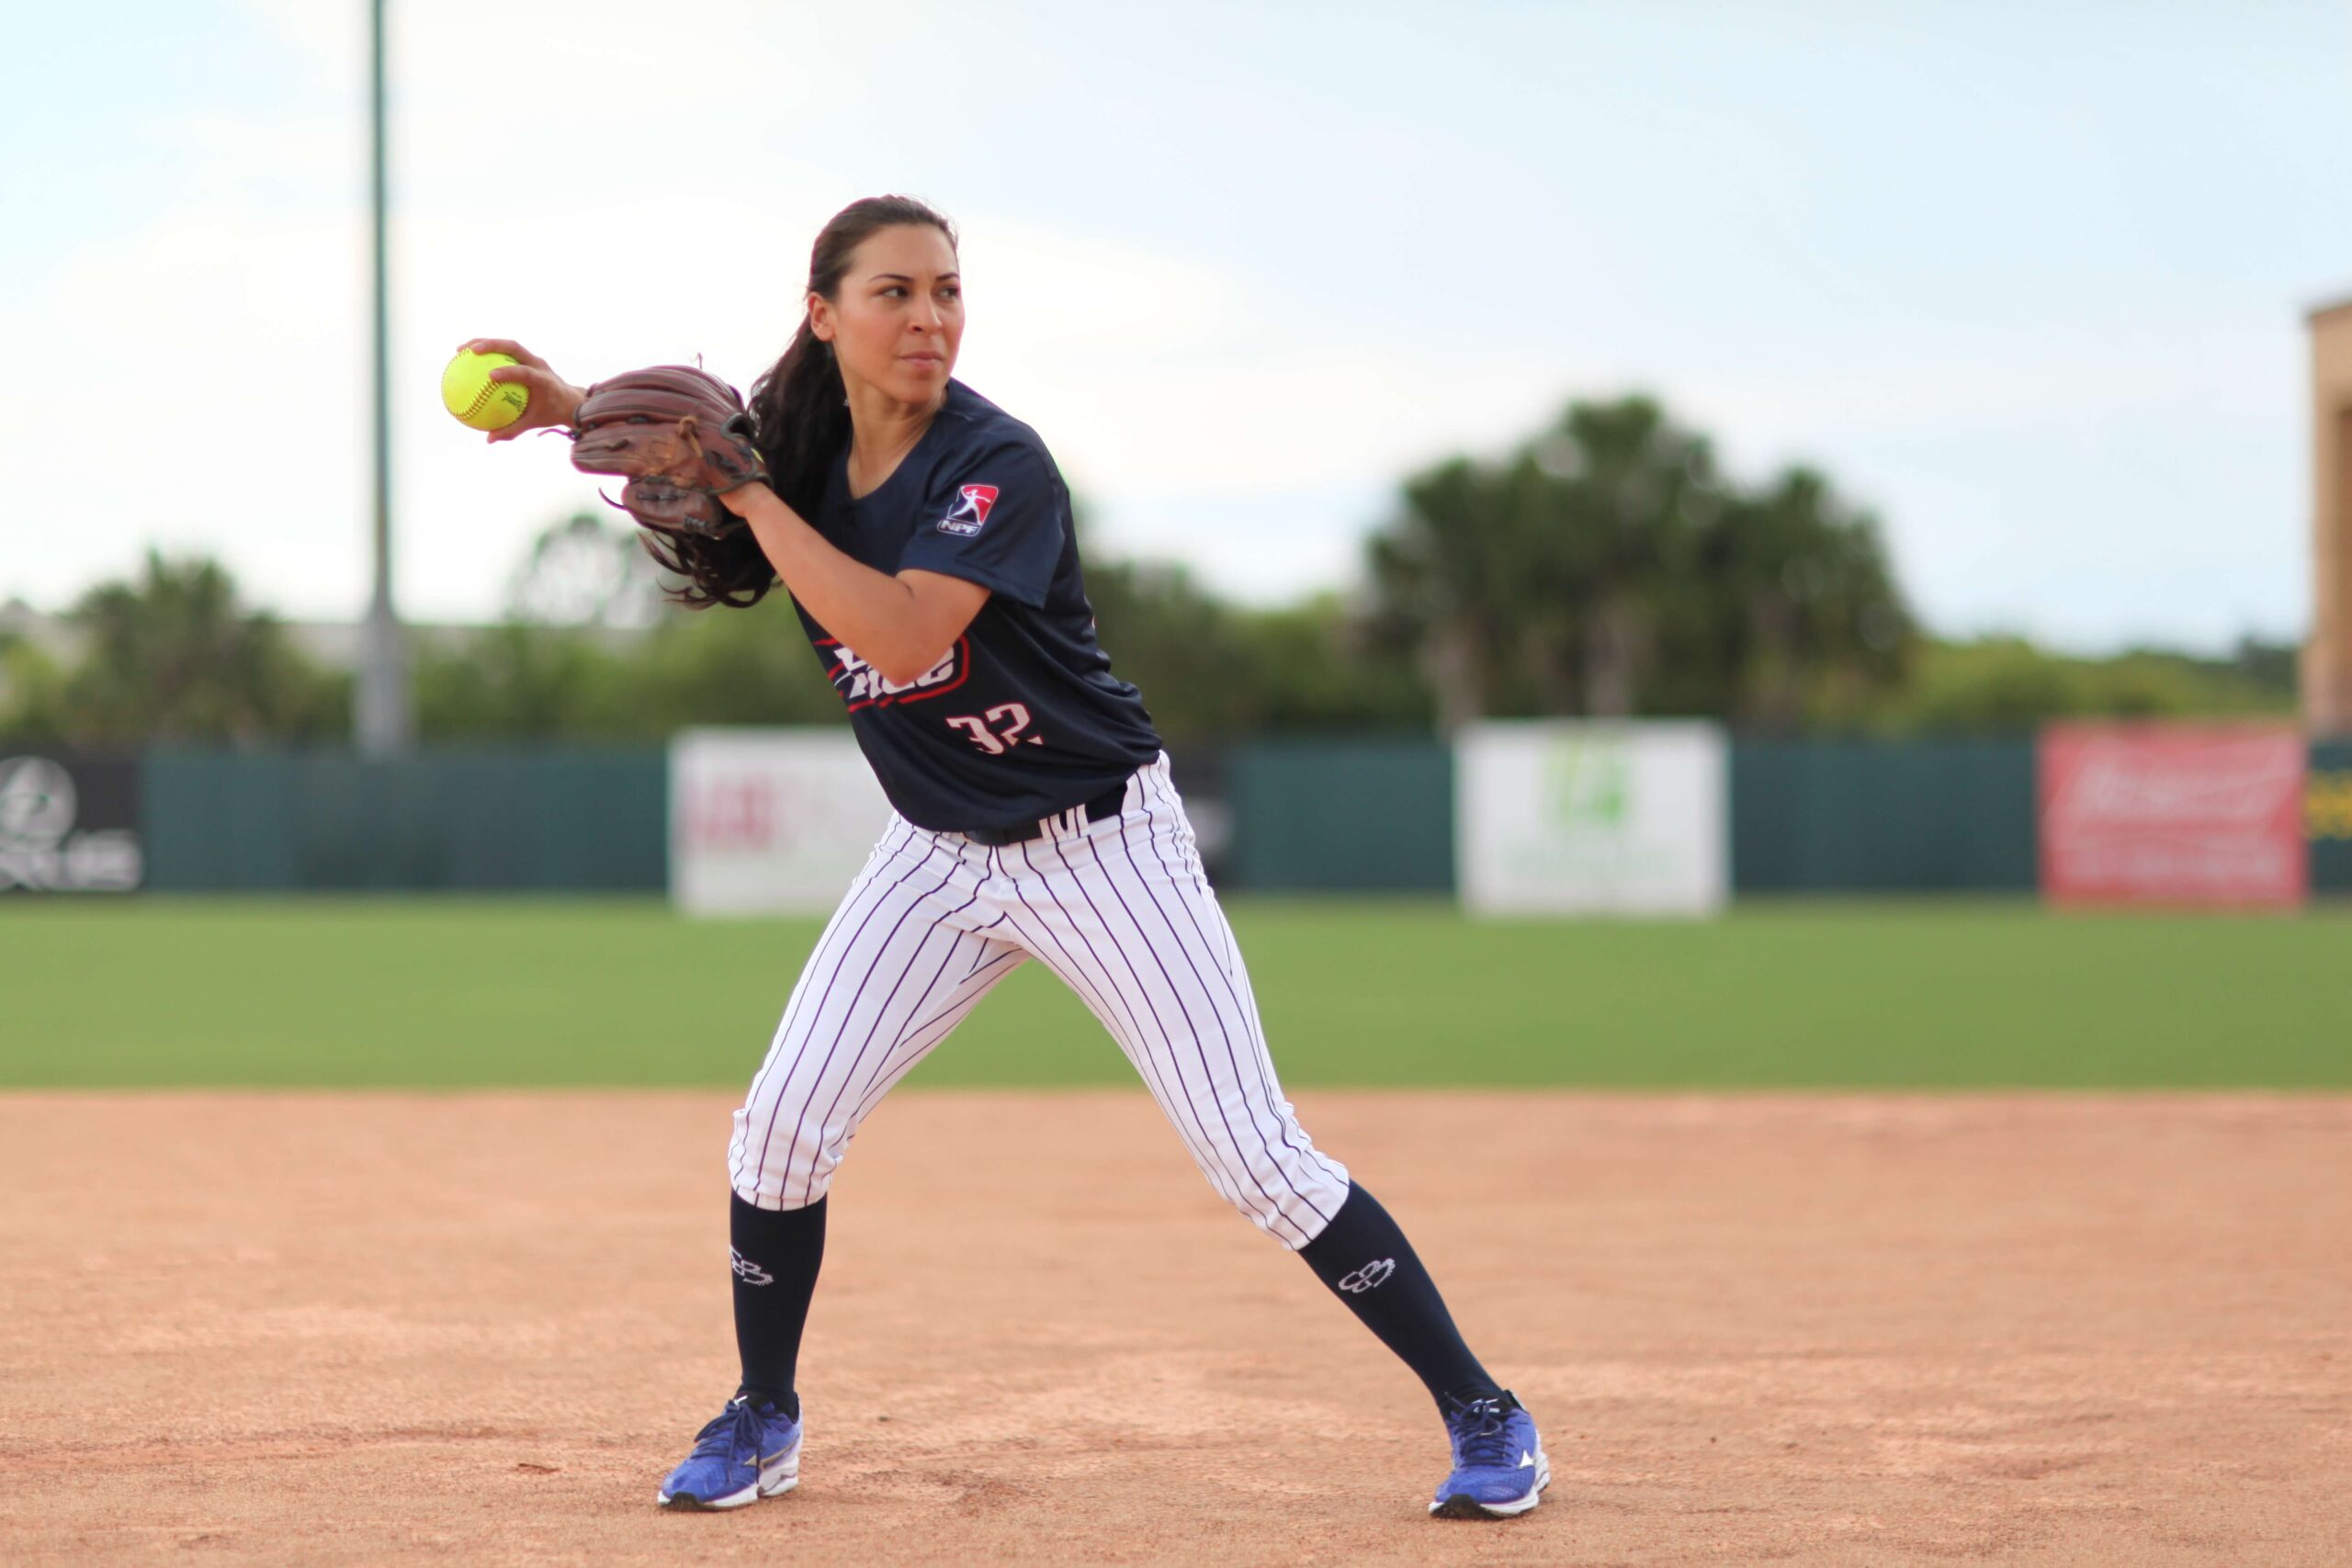 A USSSA Pride player playing at the USSSA Space Coast Complex in Viera, FL